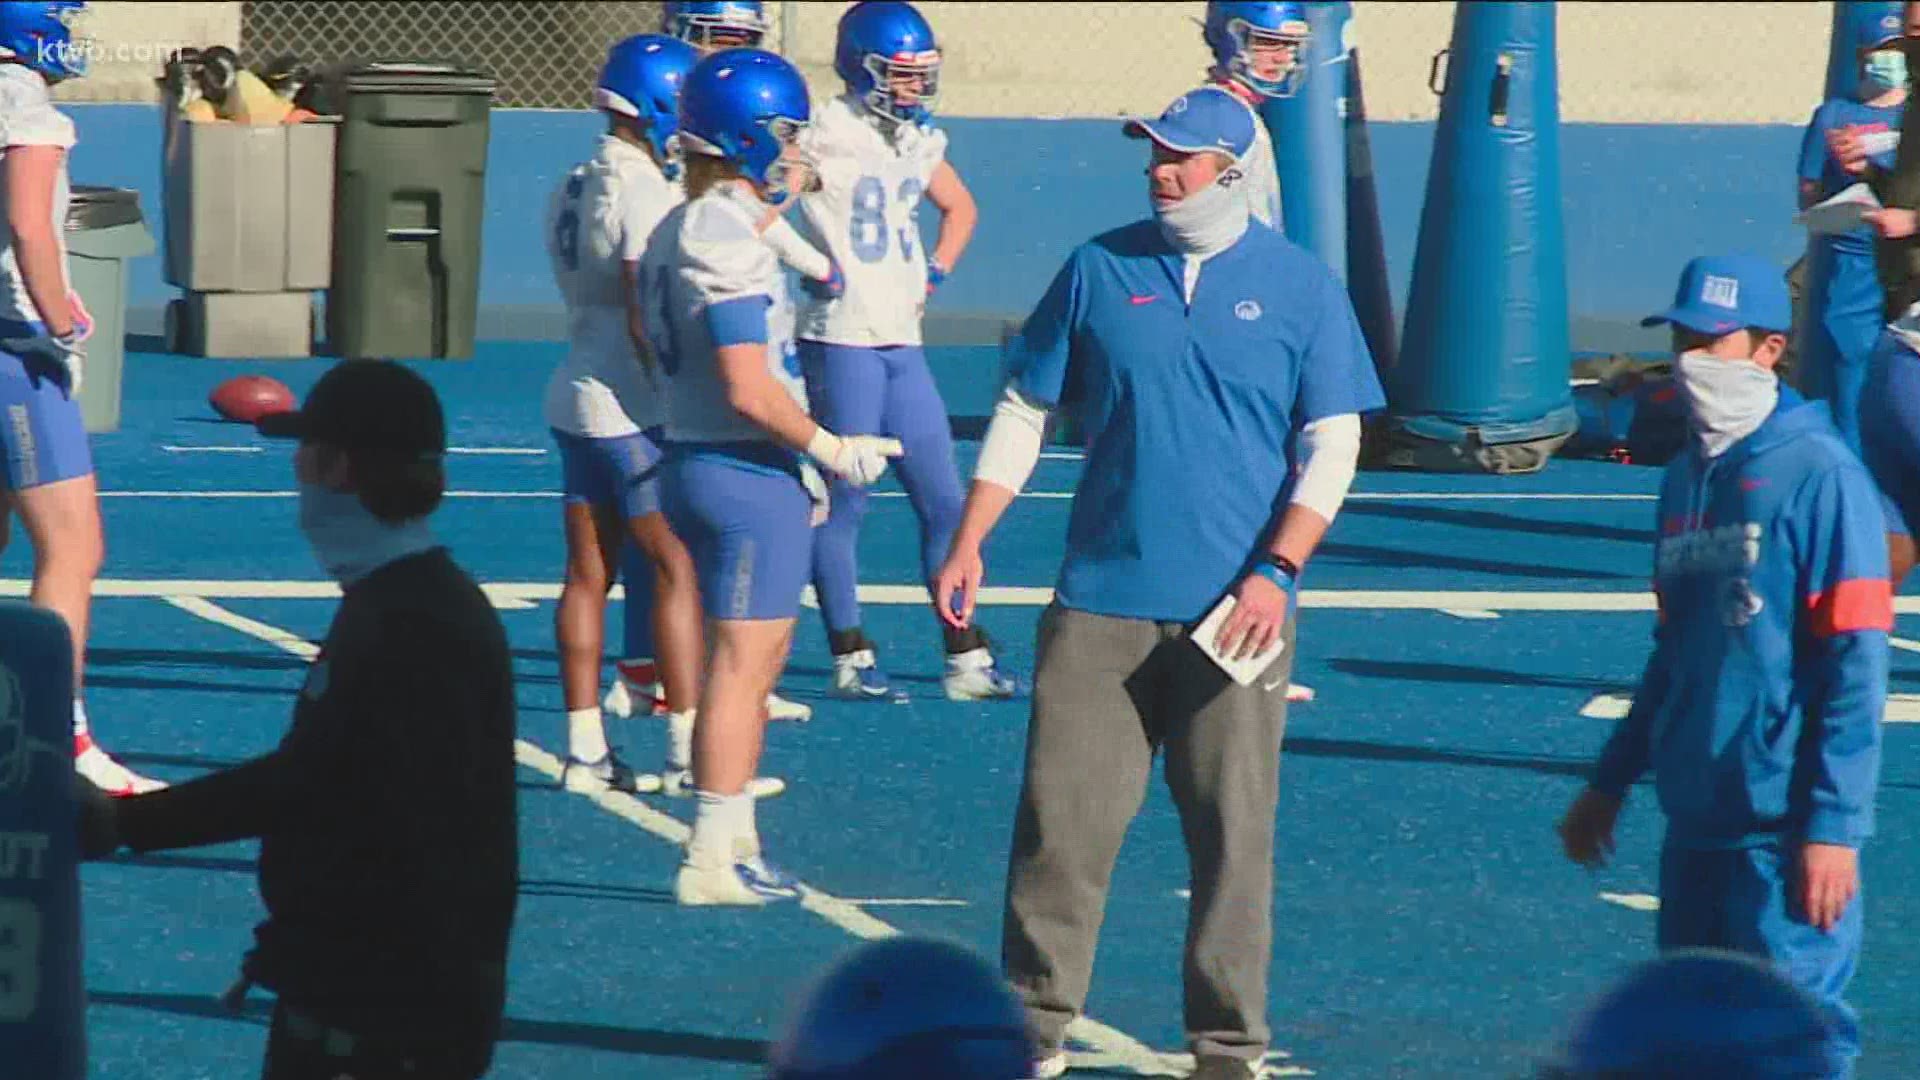 Three members of the Boise State football team's coaching staff have been living together in a condo while trying to find housing in the Boise area.